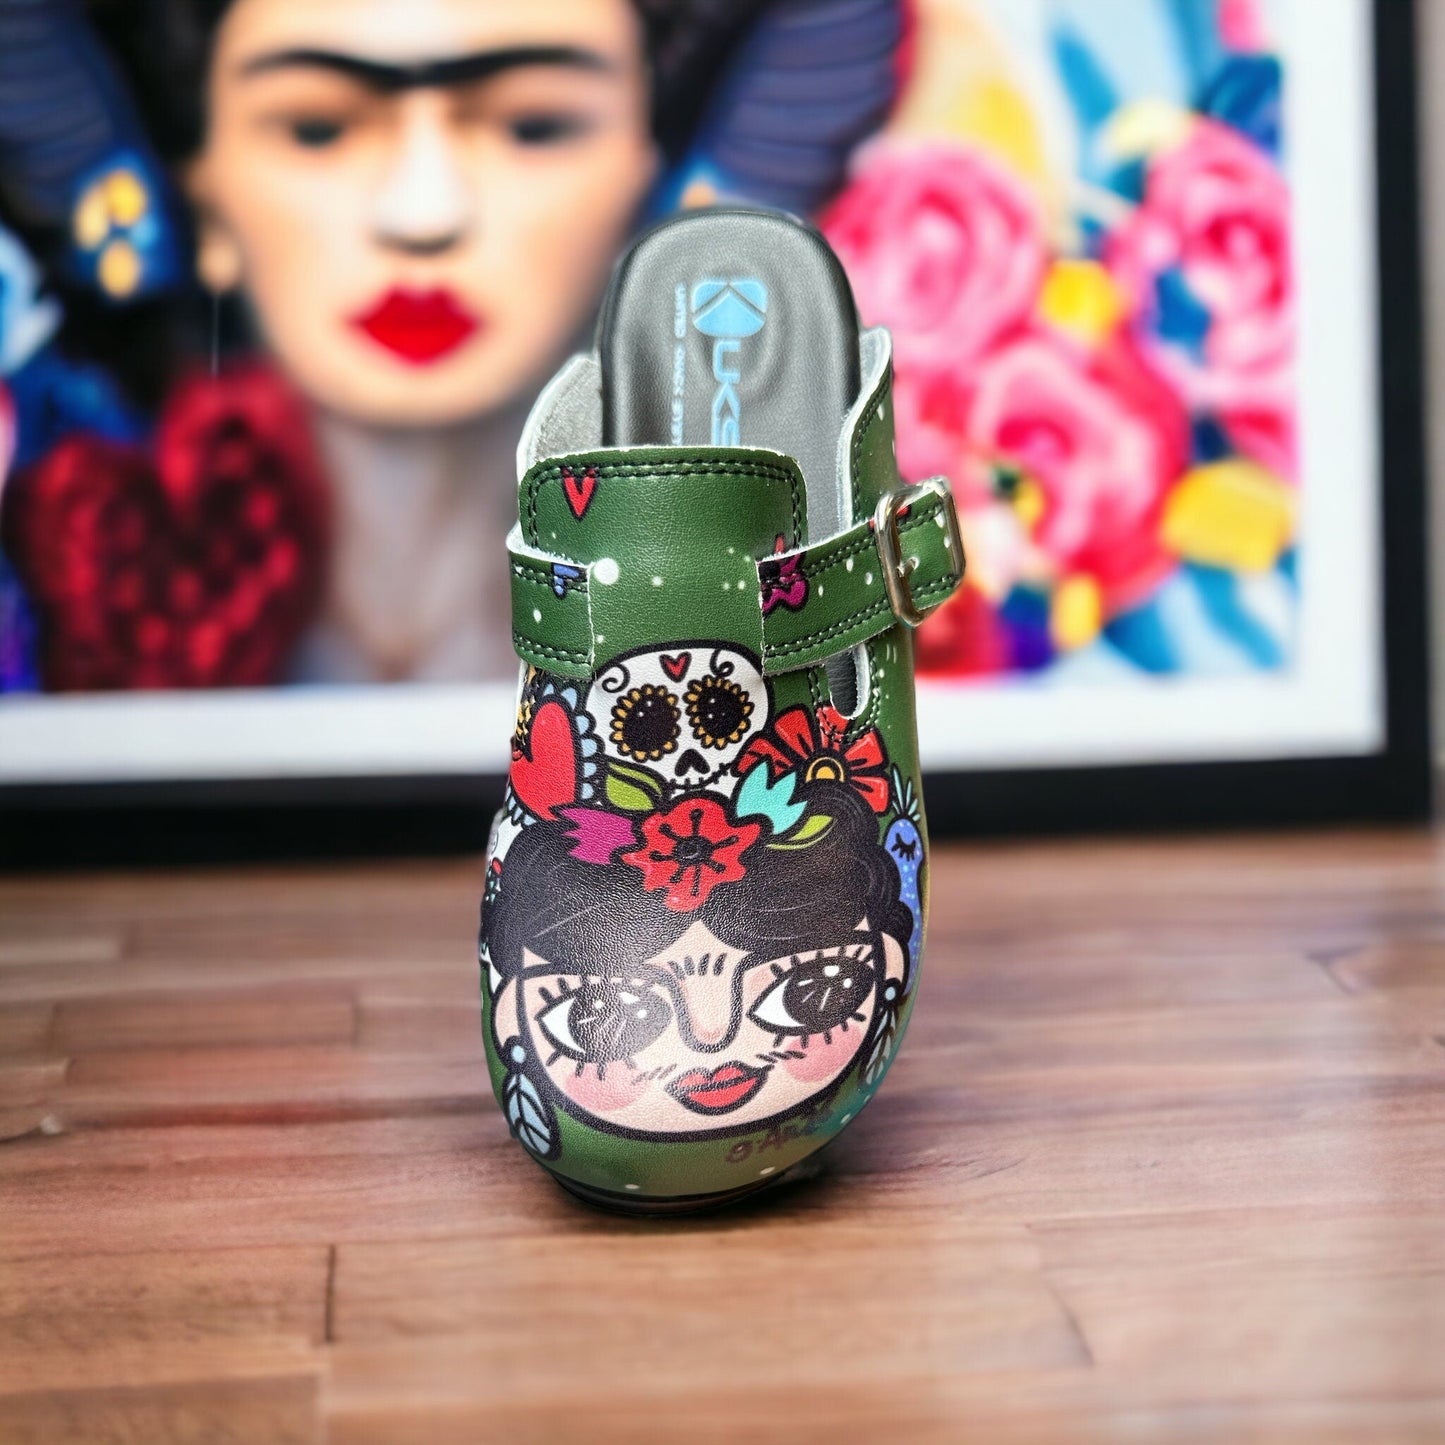 Green Frida Kahlo Air Clogx 224 Leather Clogs Slippers